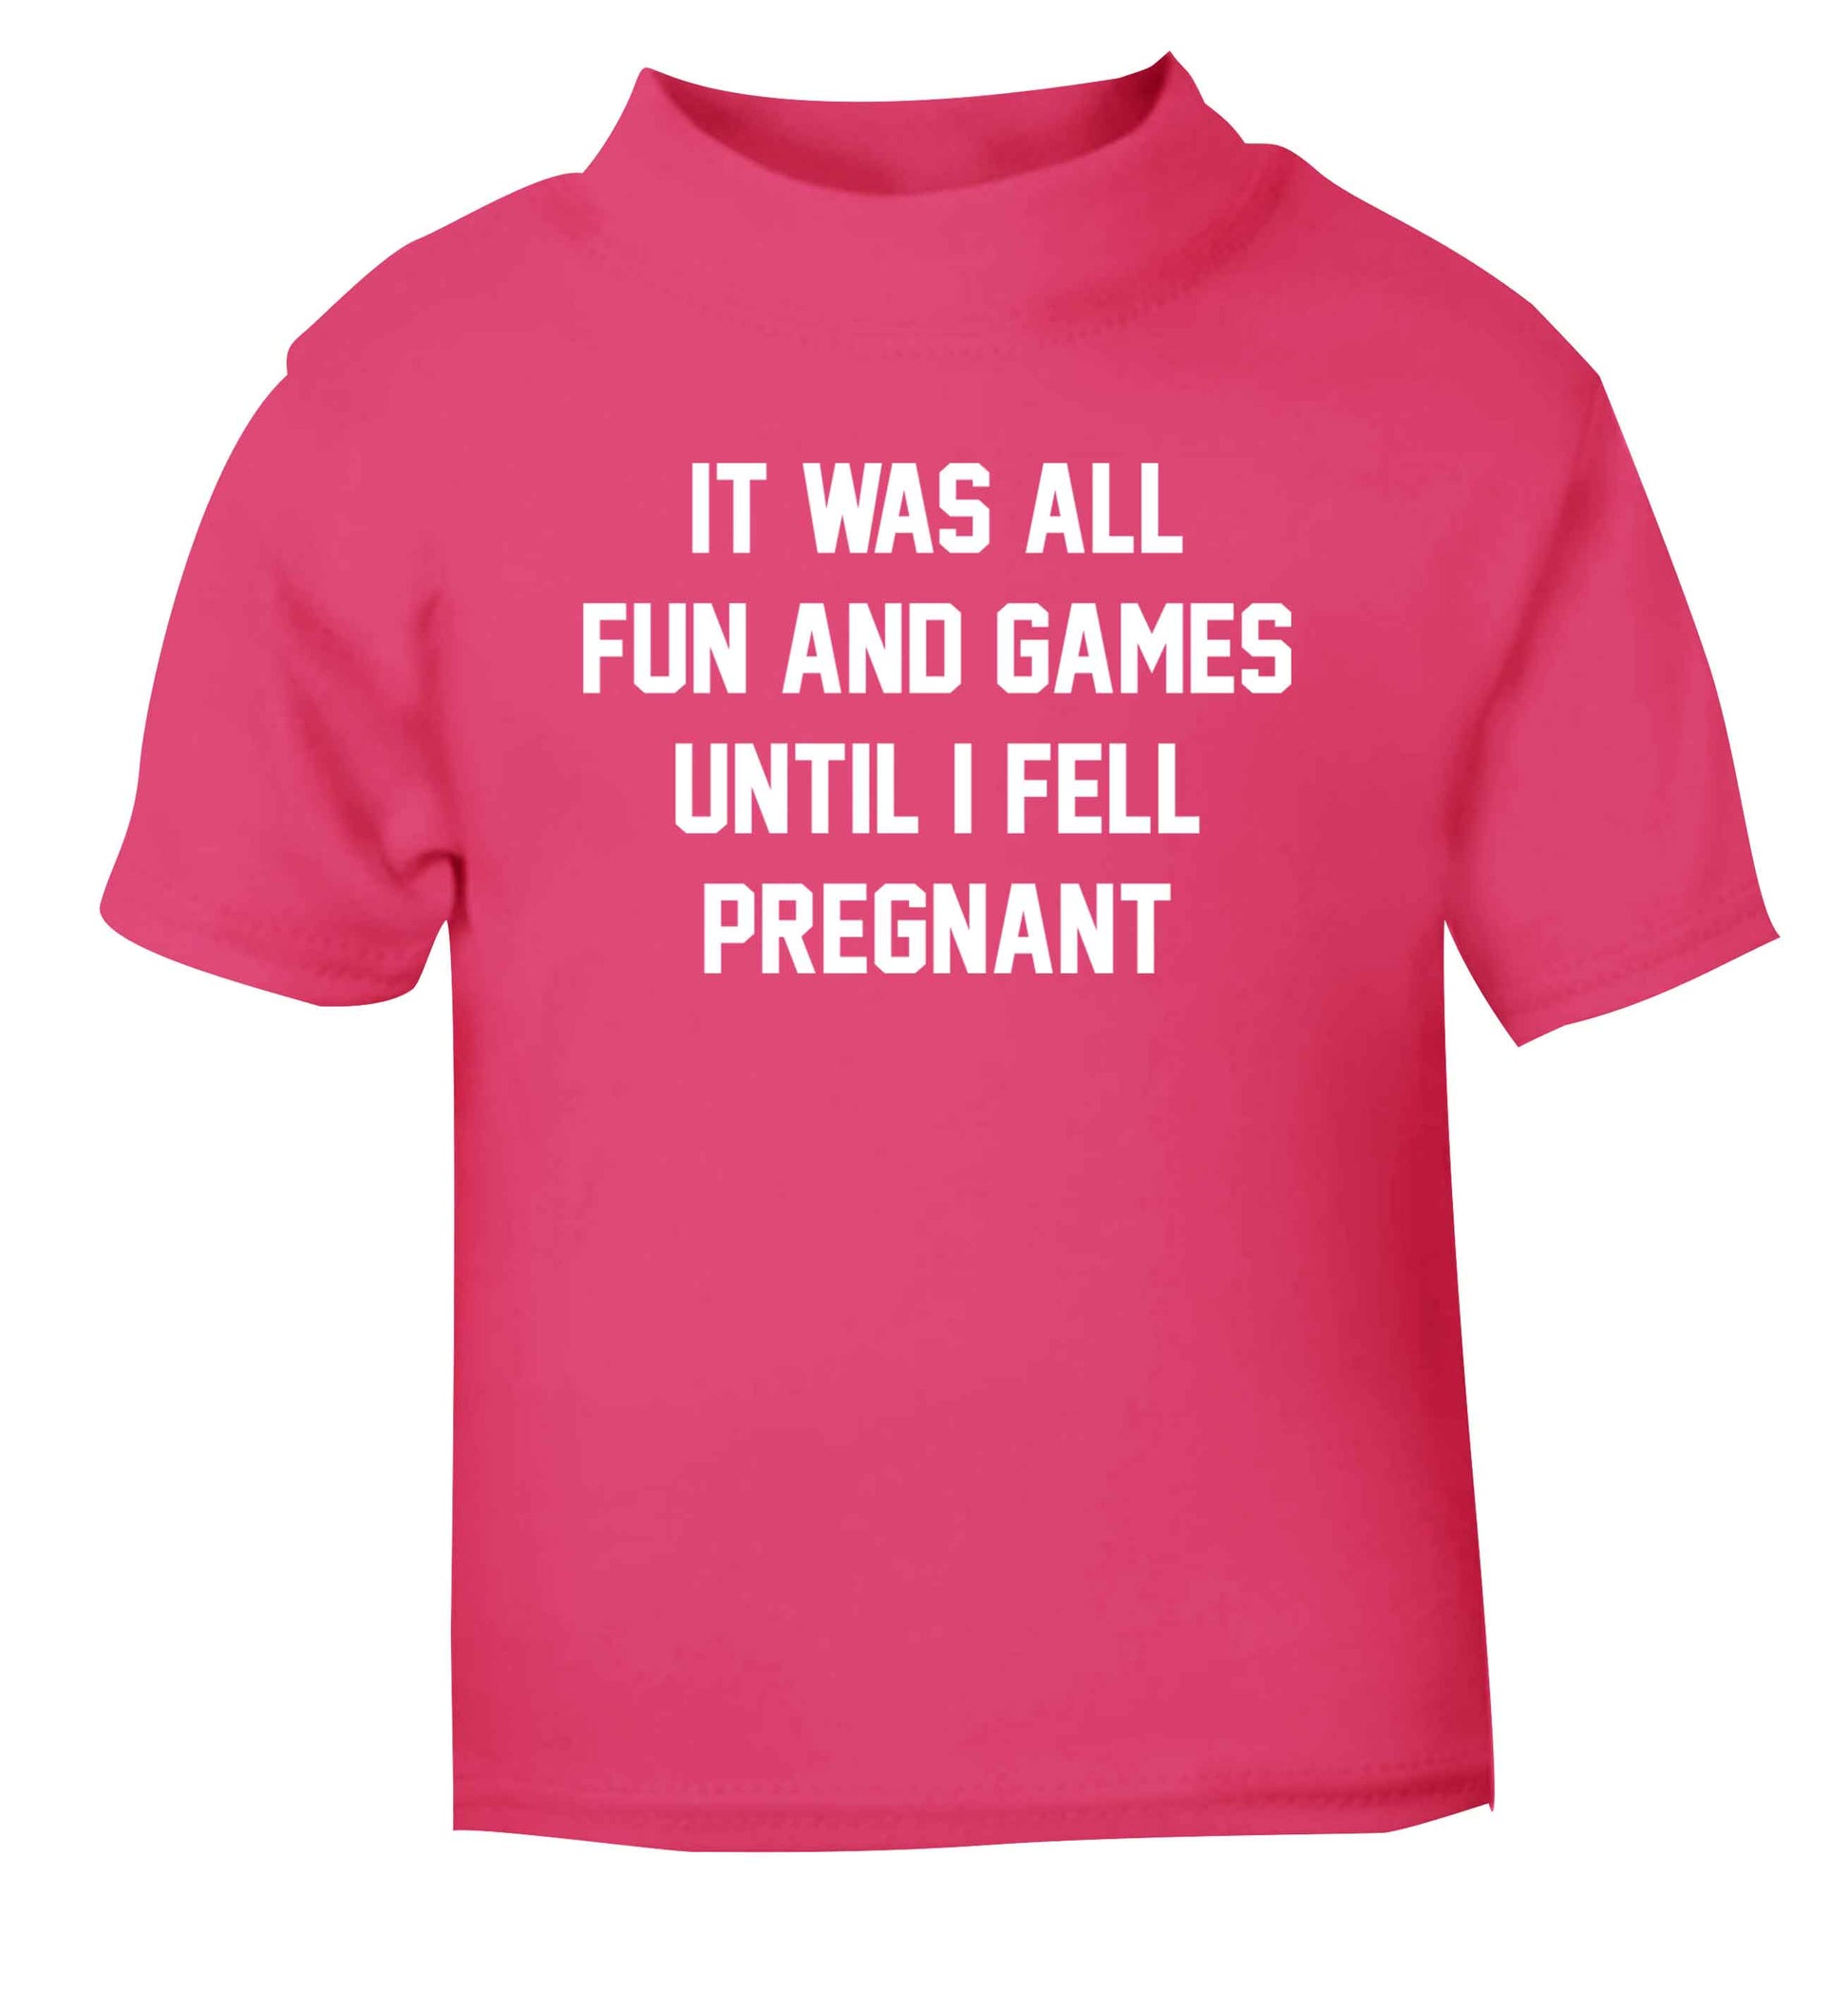 It was all fun and games until I fell pregnant kicks pink Baby Toddler Tshirt 2 Years